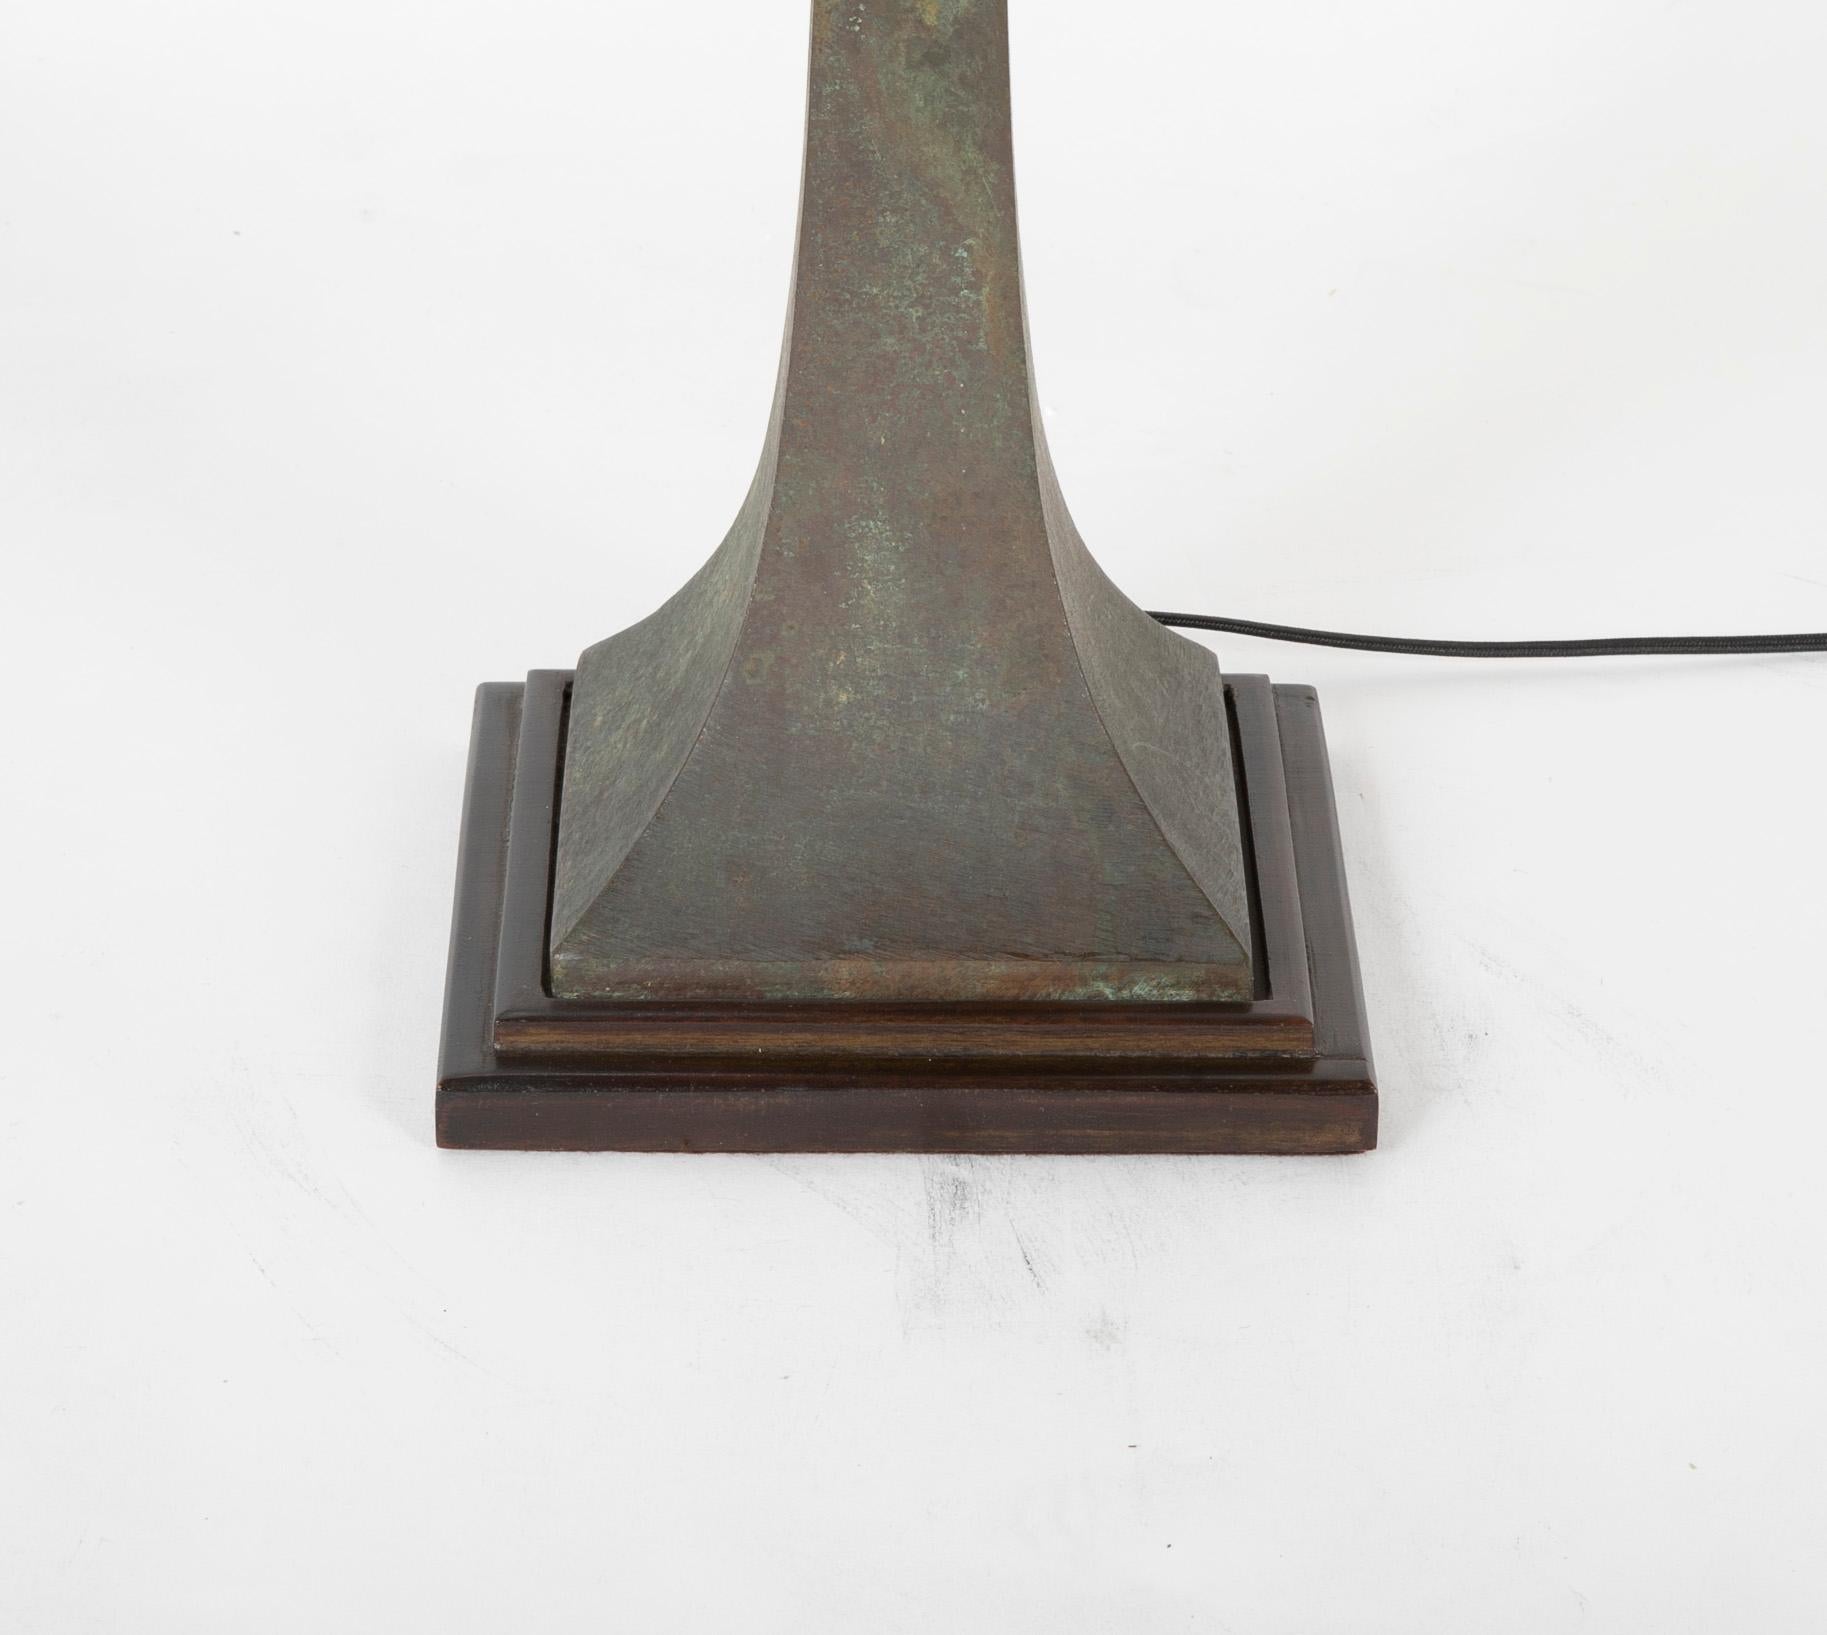 Patinated Pair of Stewart Ross James Bronze Table Lamps for Hansen, USA, 1960s For Sale